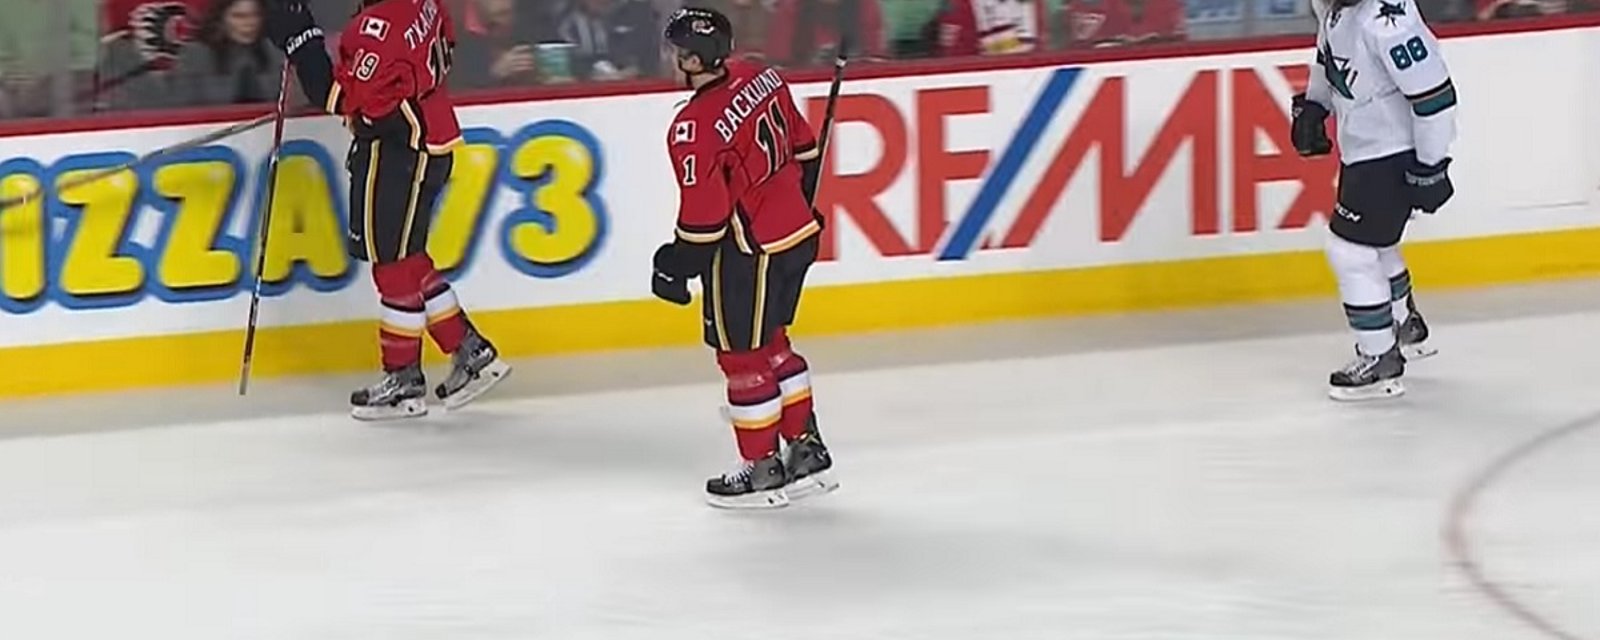 Rookie Tkachuk steals Brent Burns' stick and refuses to give it back!